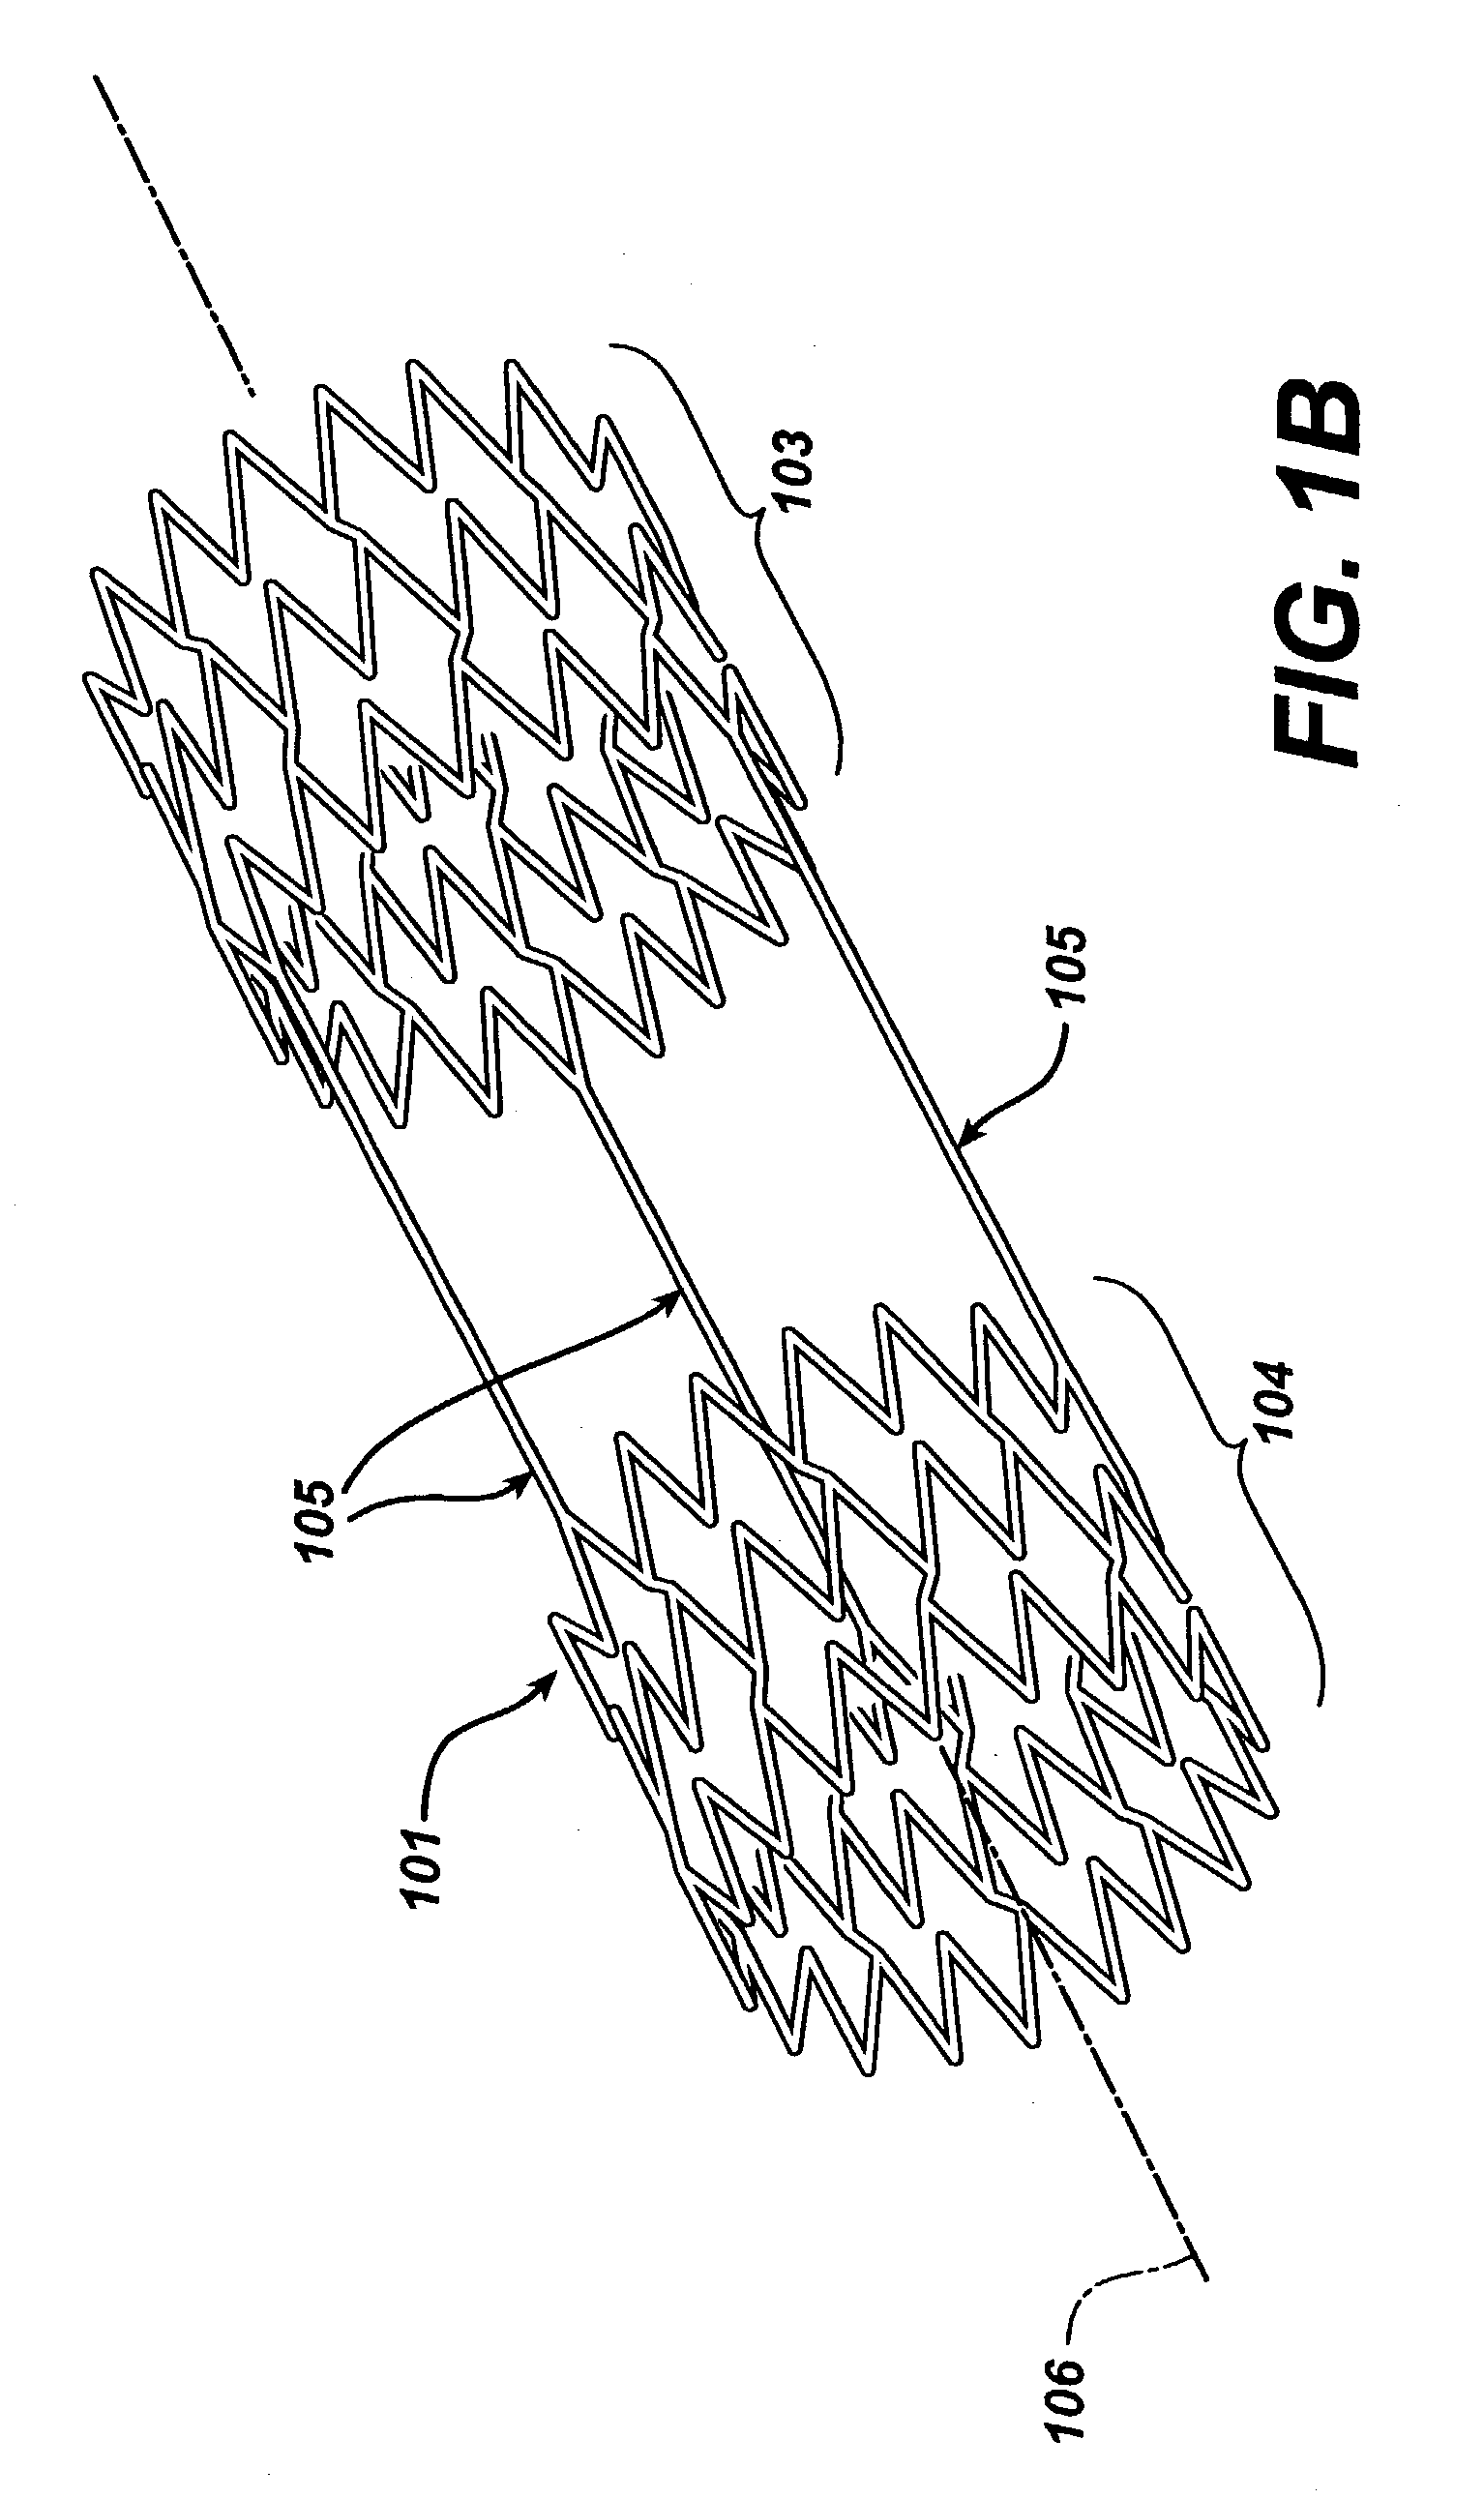 Method of forming a tubular membrane on a structural frame